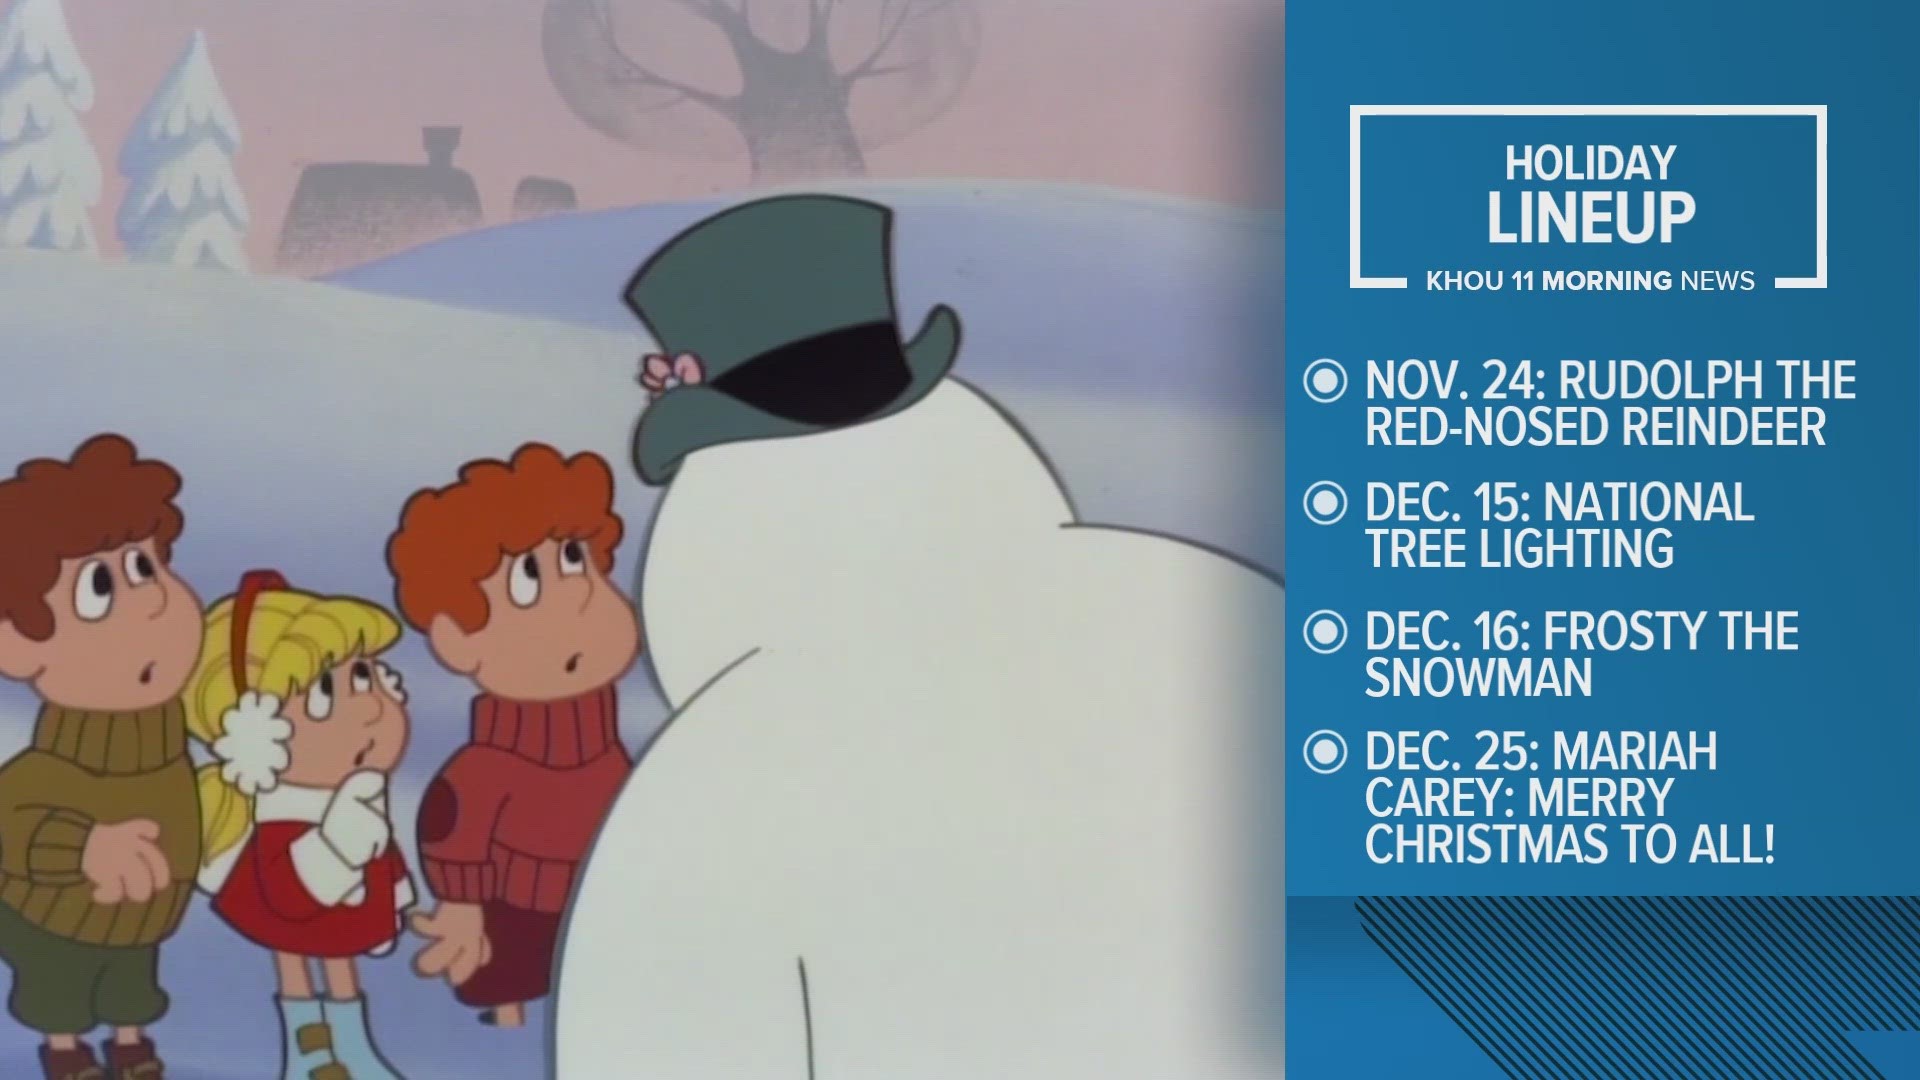 You snow the drill! From "Rudolph The Red-Nosed Reindeer" to "Mariah Carey: Merry Christmas To All!", the schedule is jam-packed with holiday feels.